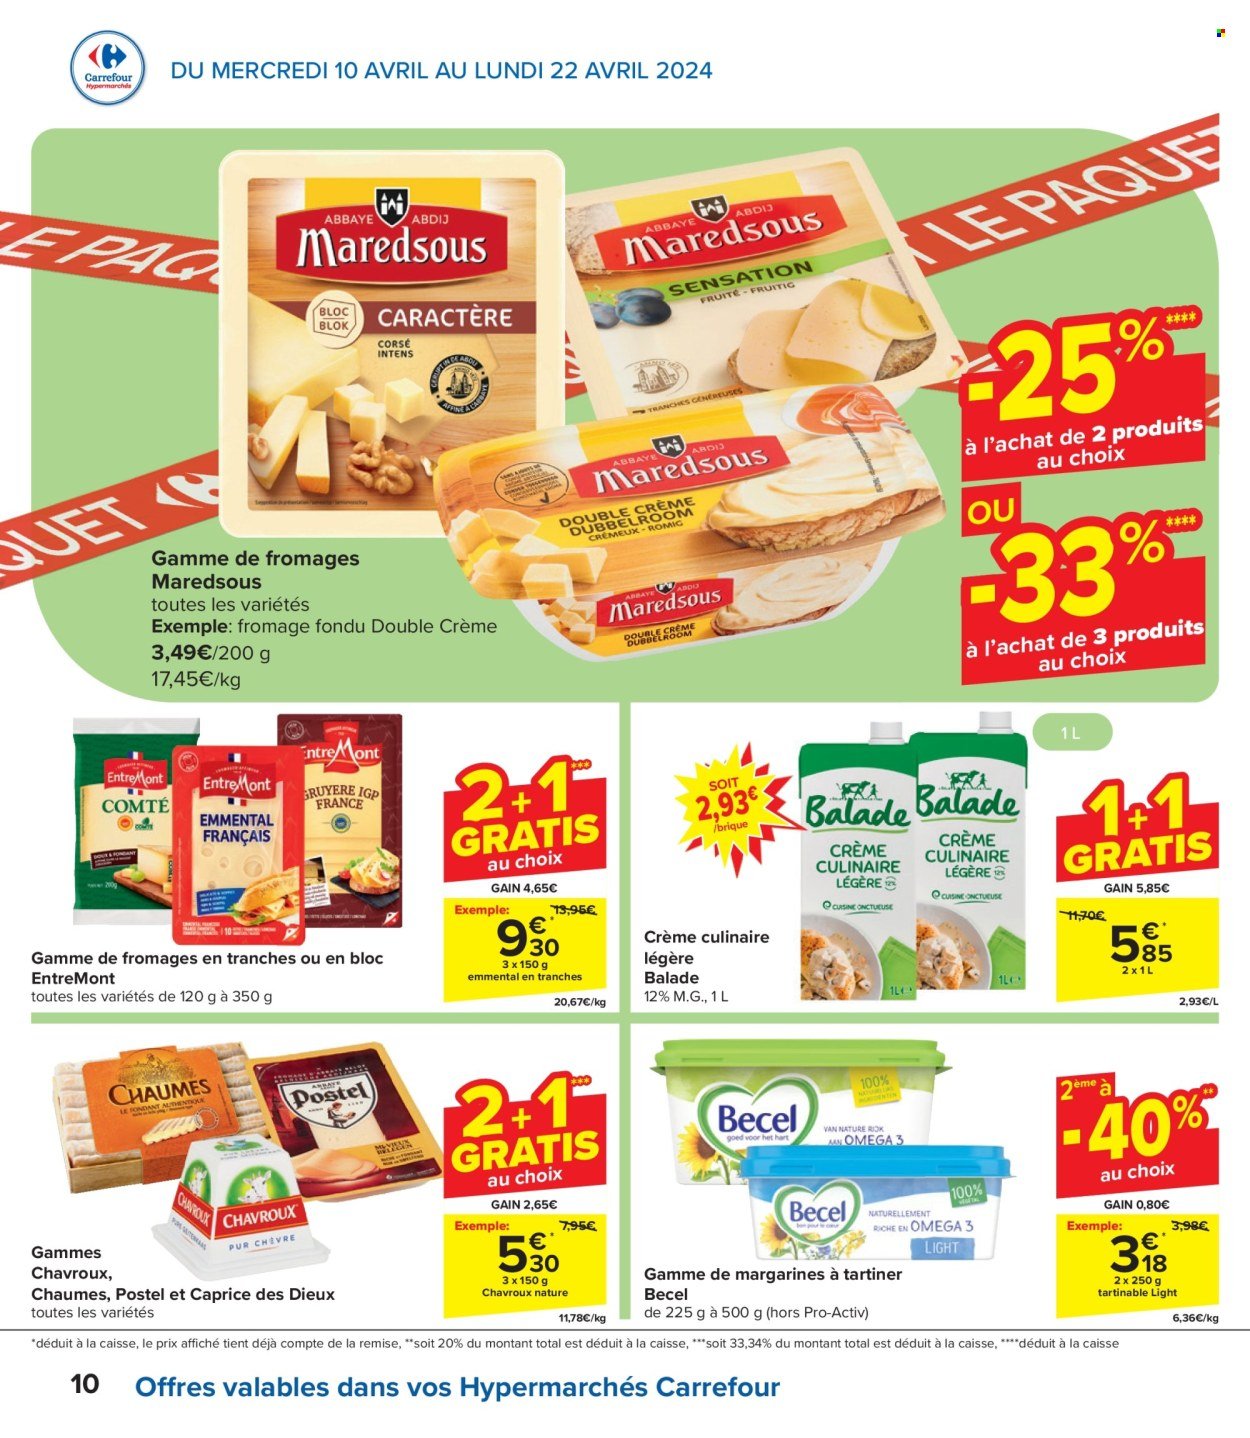 Catalogue Carrefour hypermarkt - 10.4.2024 - 22.4.2024. Page 10.